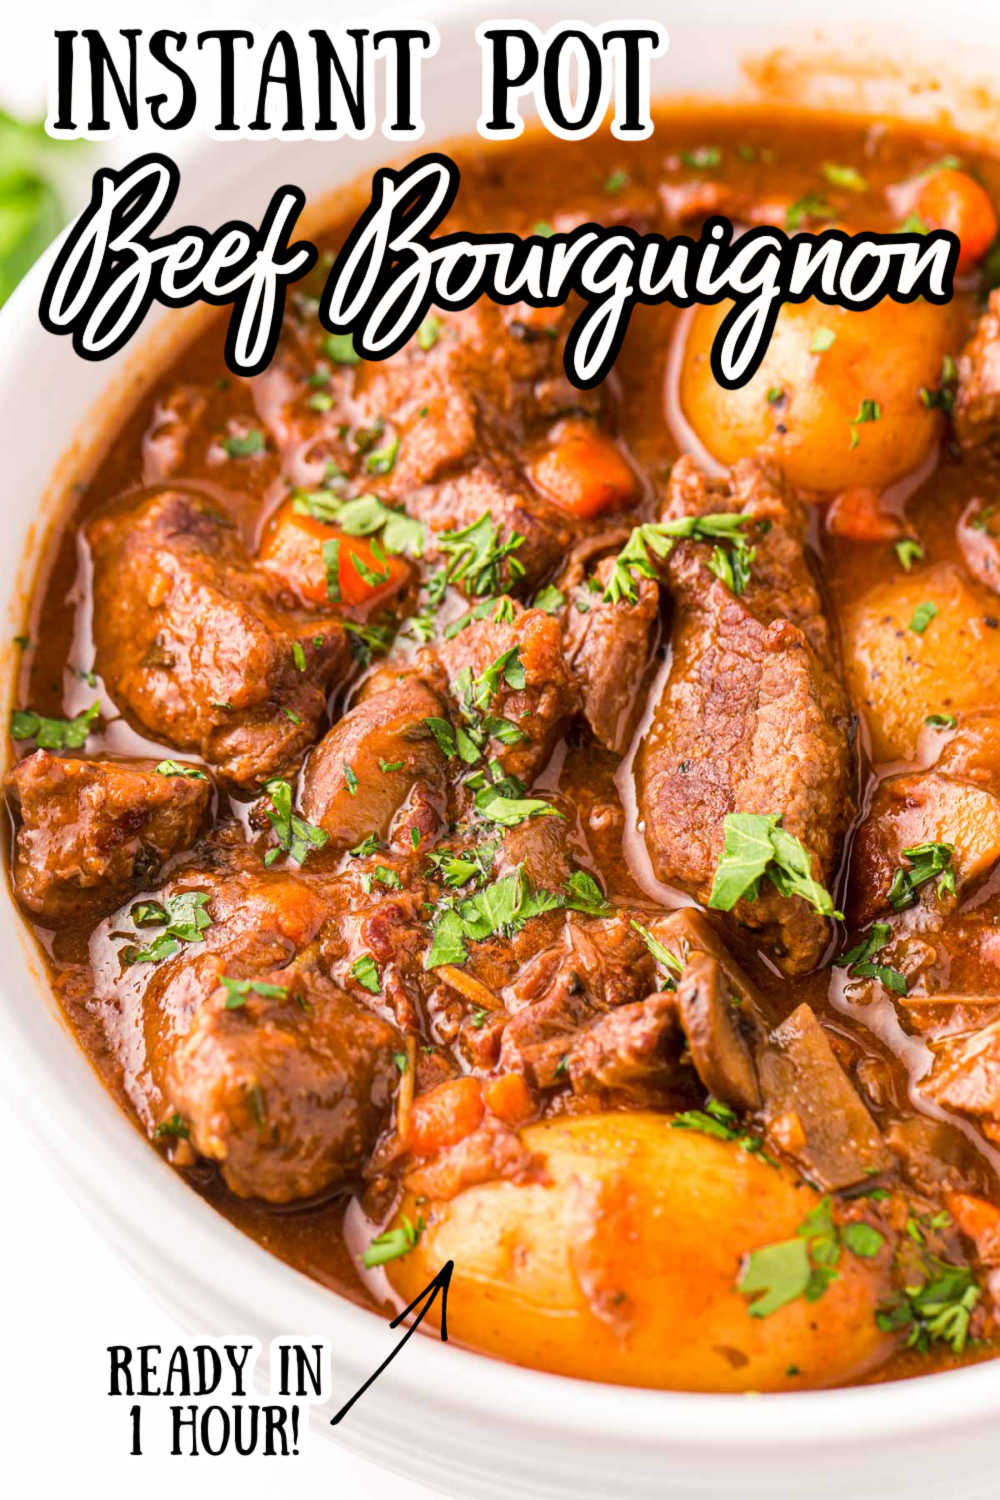 Instant Pot Beef Bourguignon has tender, juicy chunks of beef surrounded by carrots, mushrooms, and potatoes that are covered in a delicious gravy made of beef broth and red wine!   via @sugarandsoulco